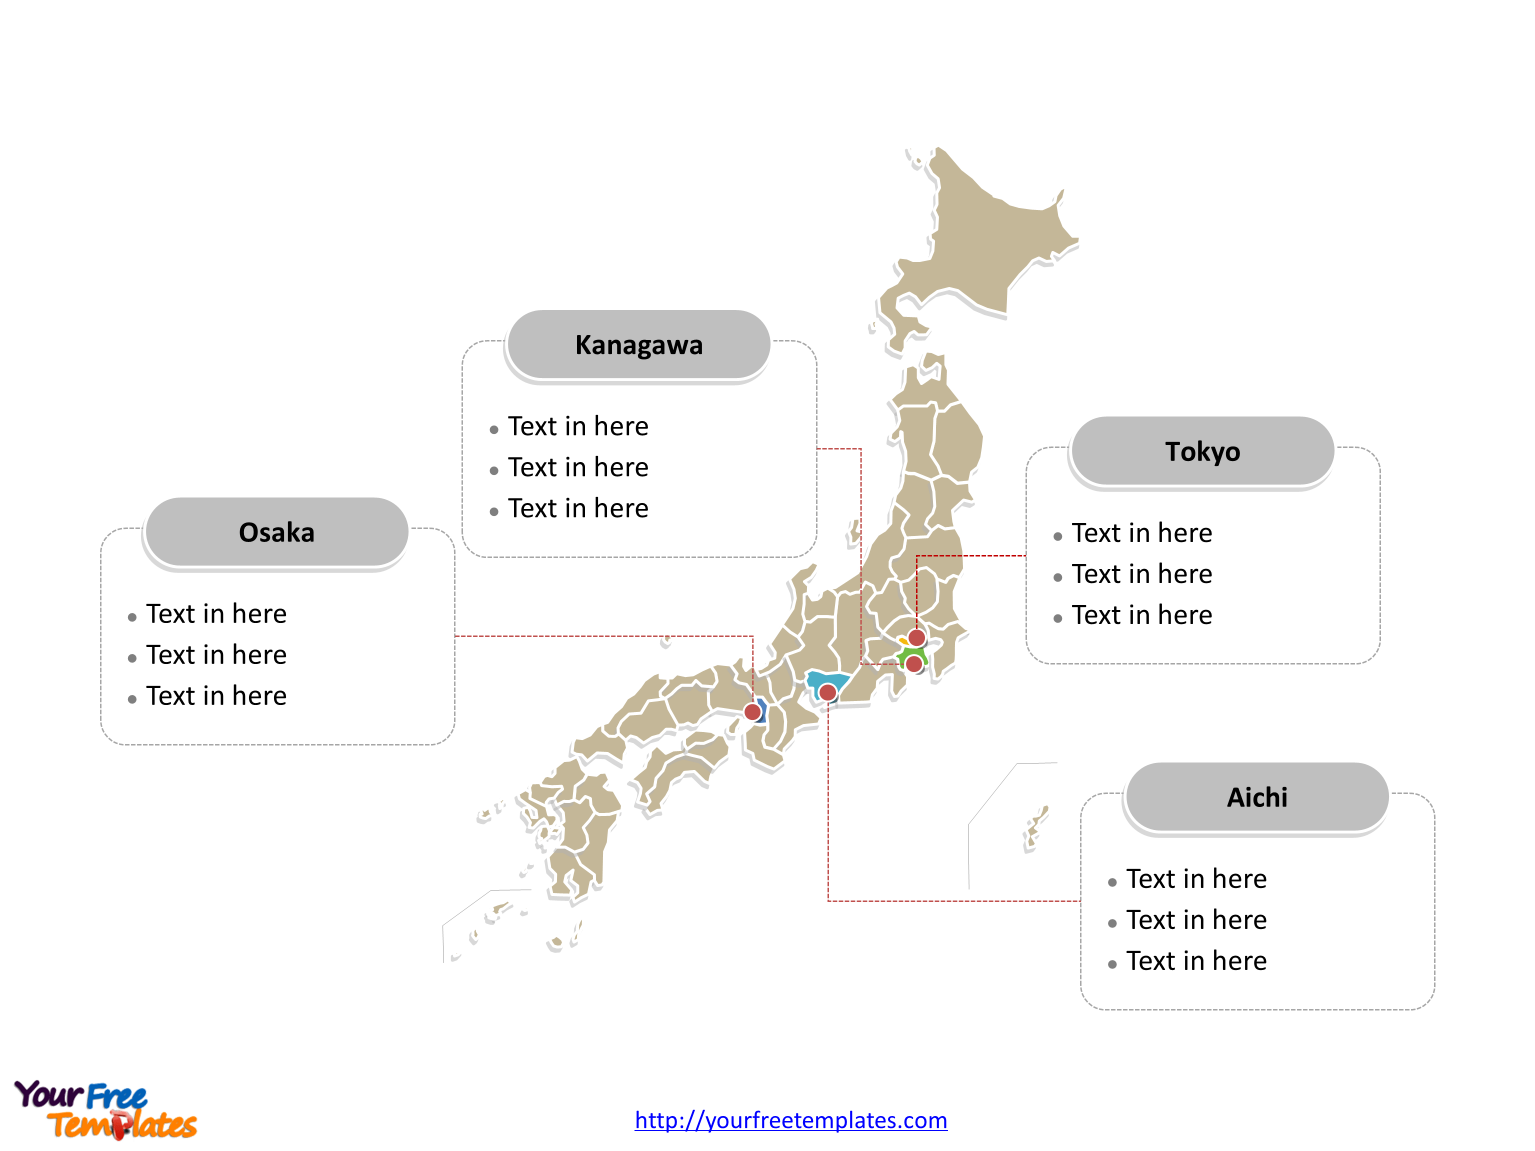 Japan Editable map labeled with major states